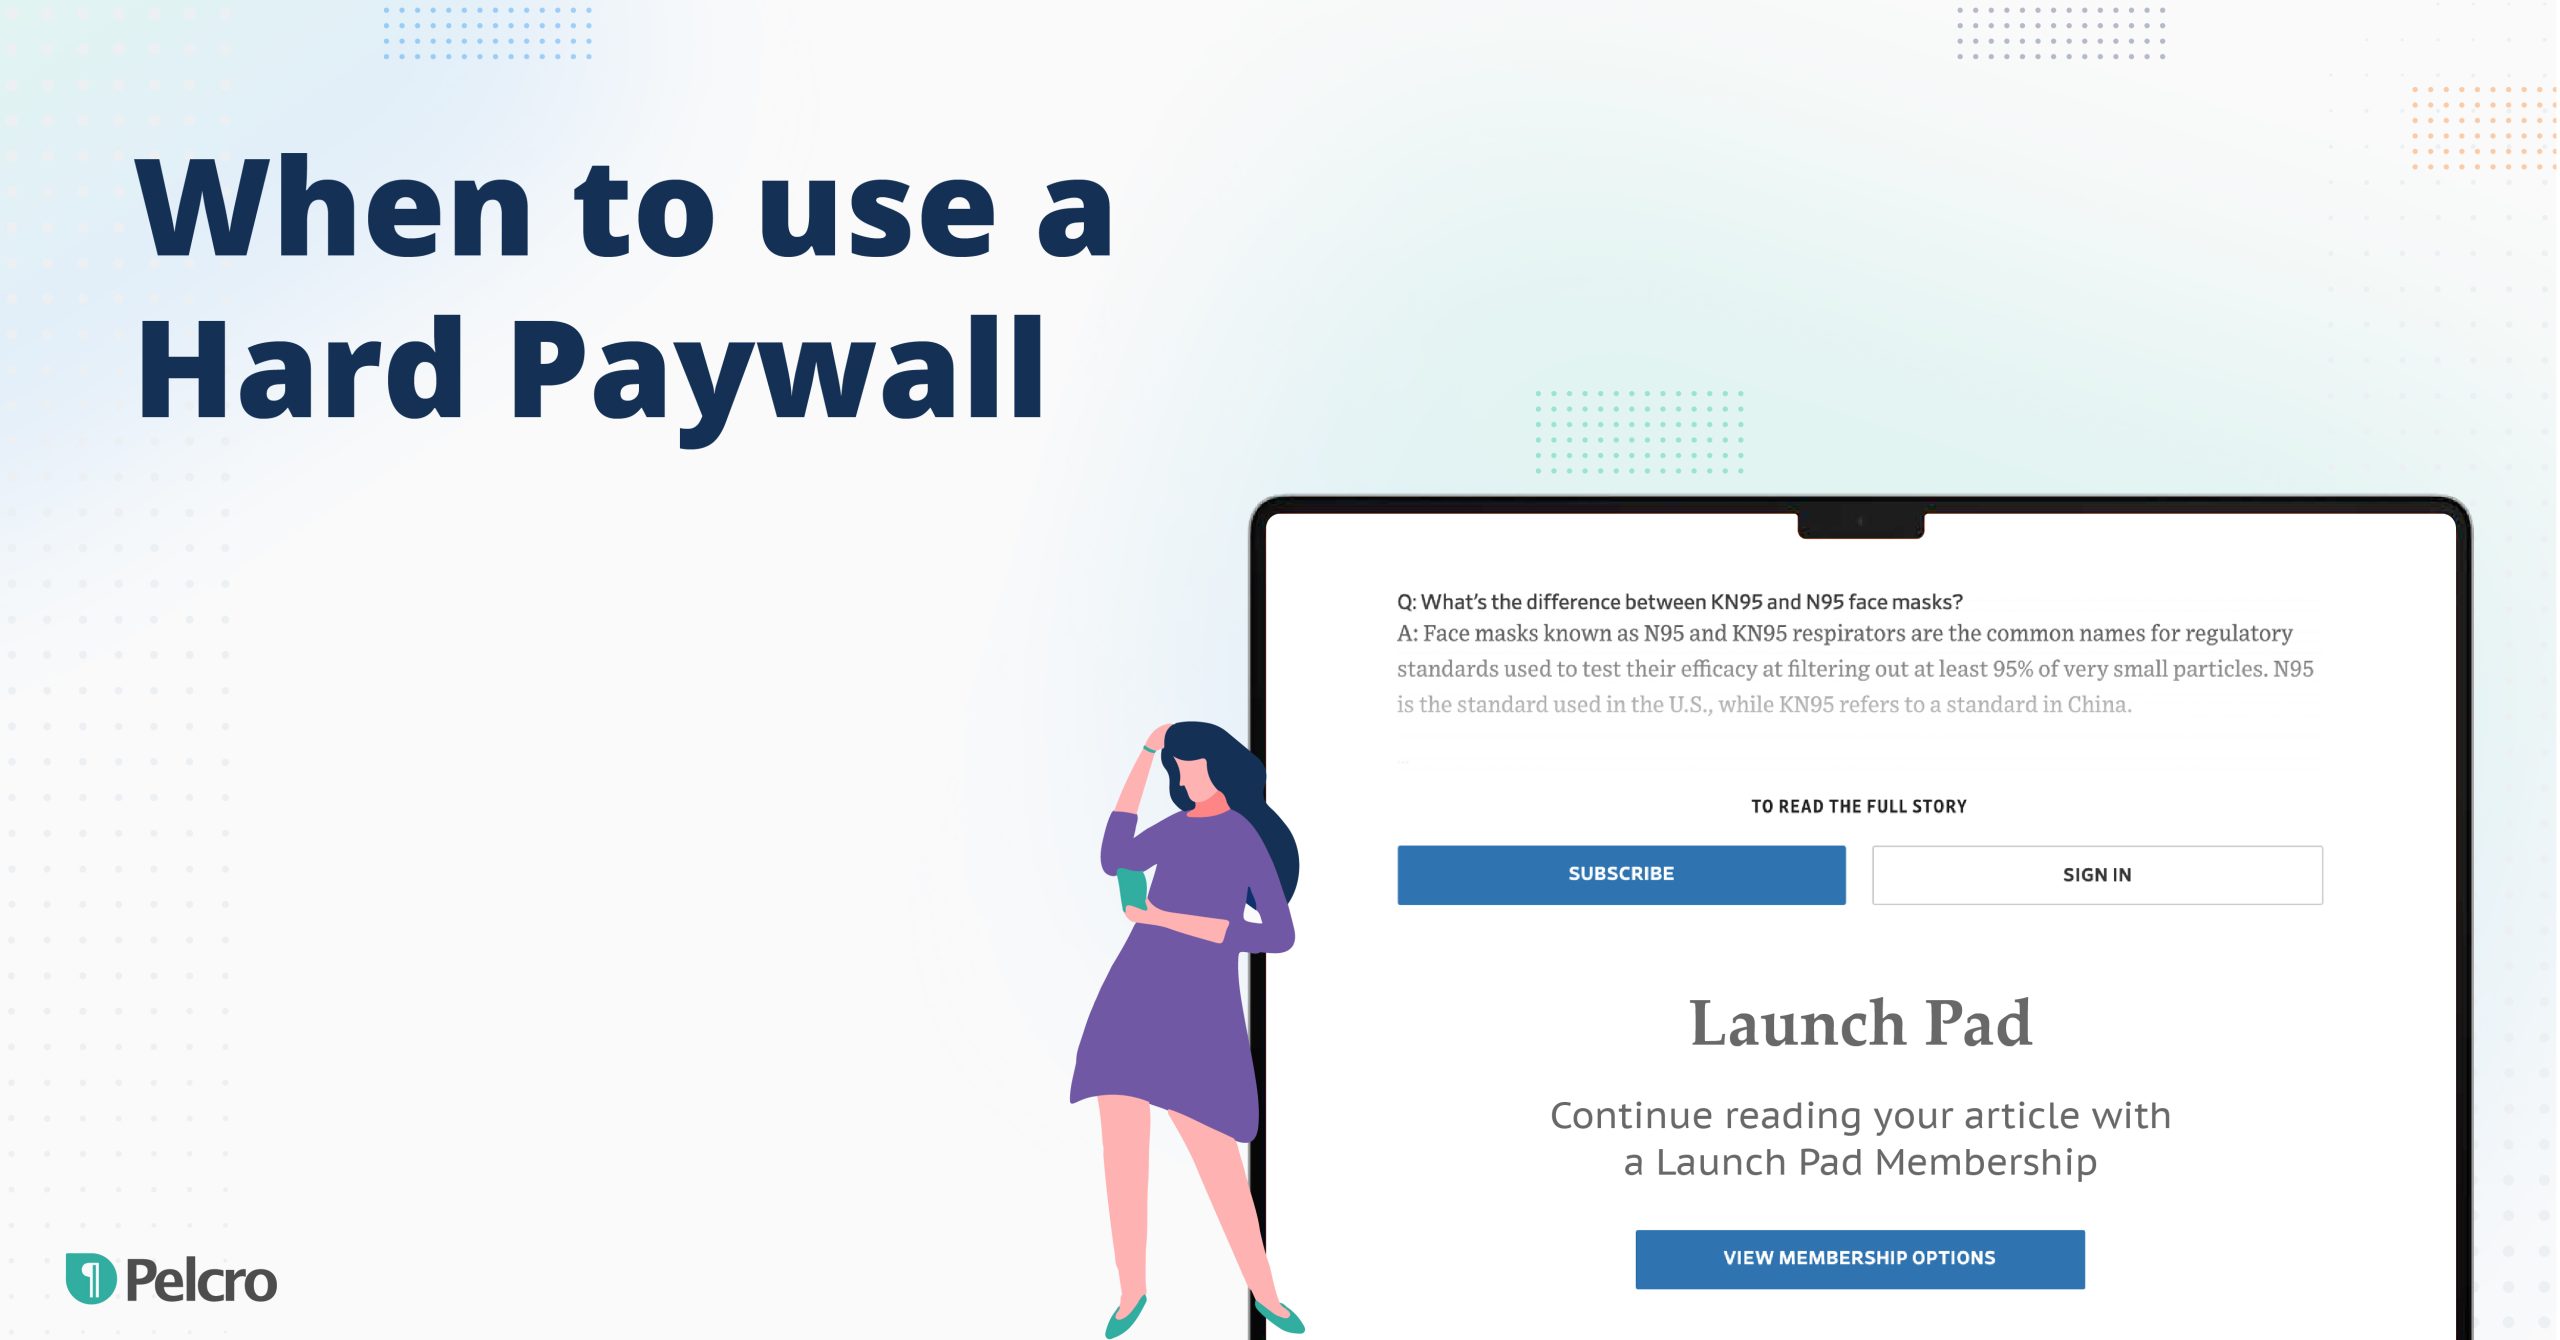 When to use a hard paywall